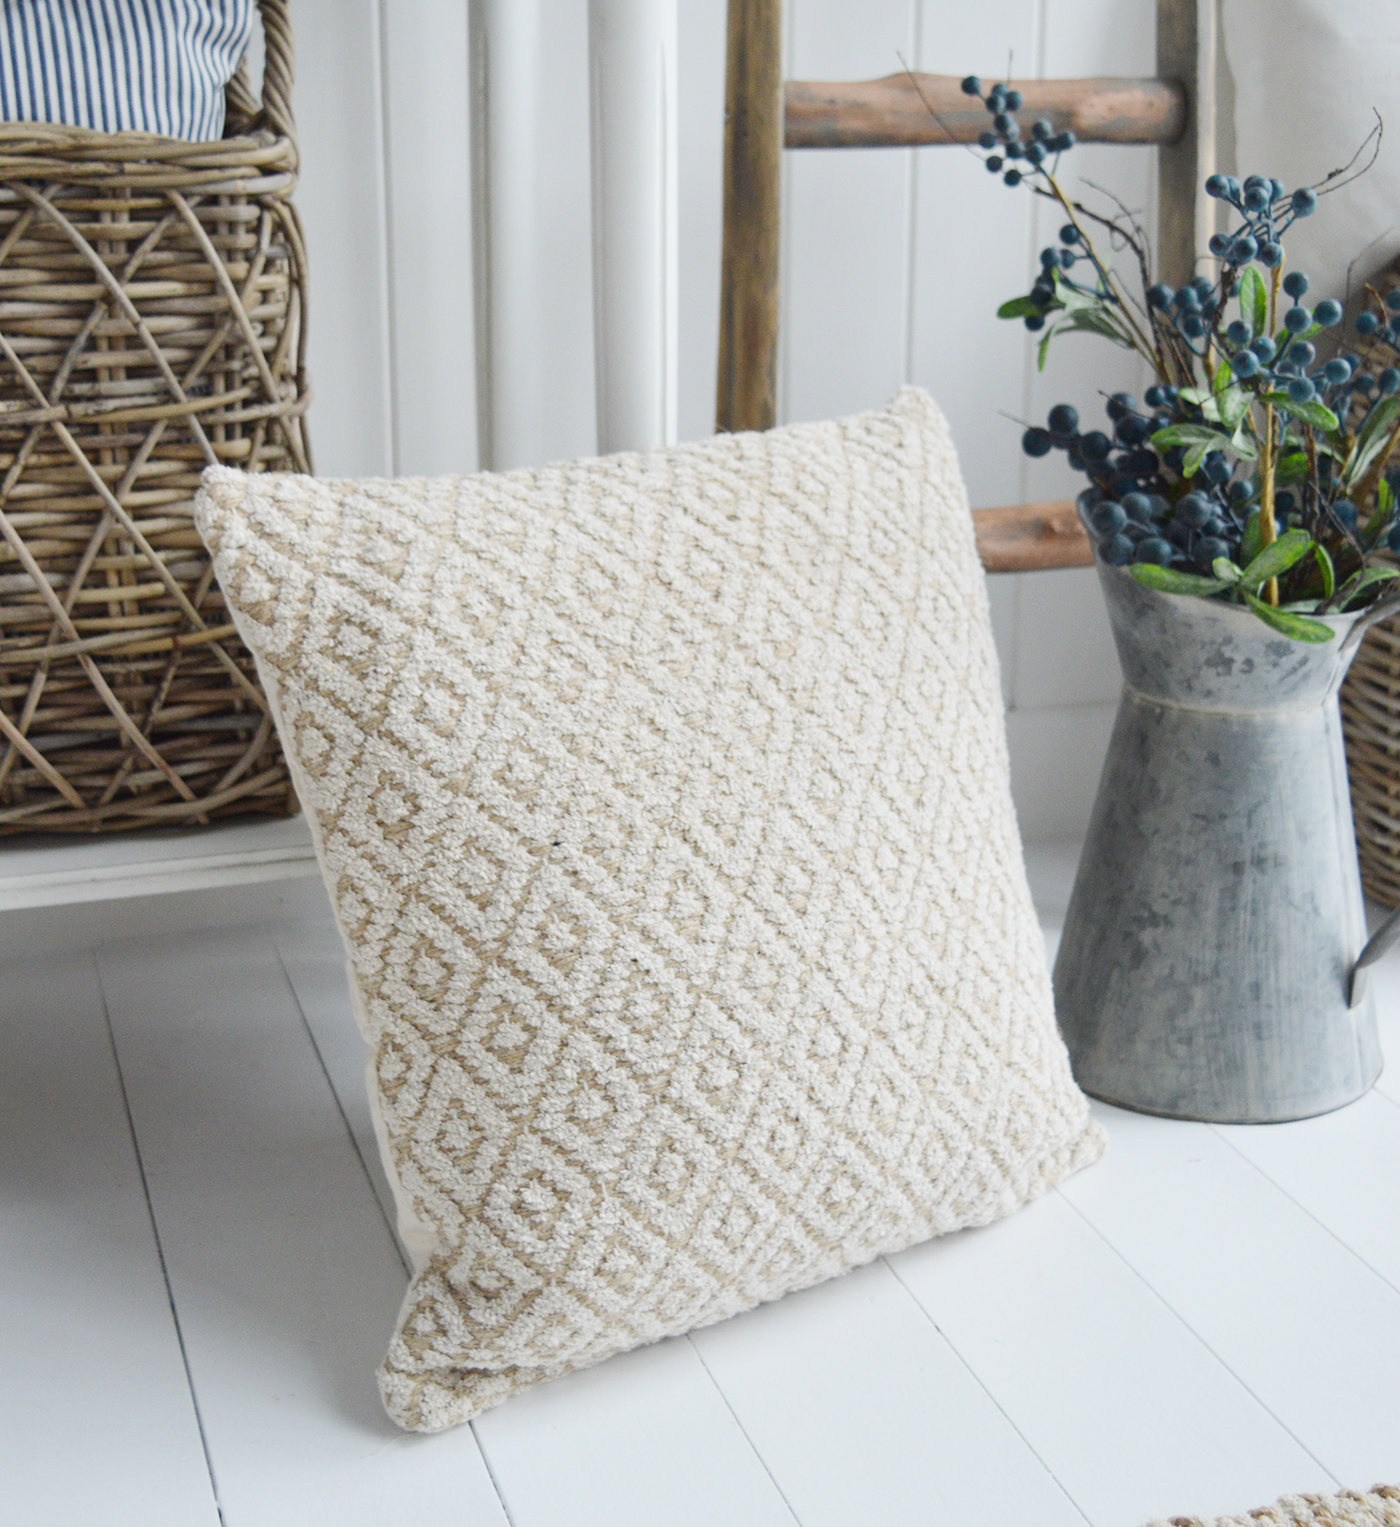 Jute Cushion - Just perfect for our New England styled interiors for coastal, city and country homes in a simple but gorgeous style